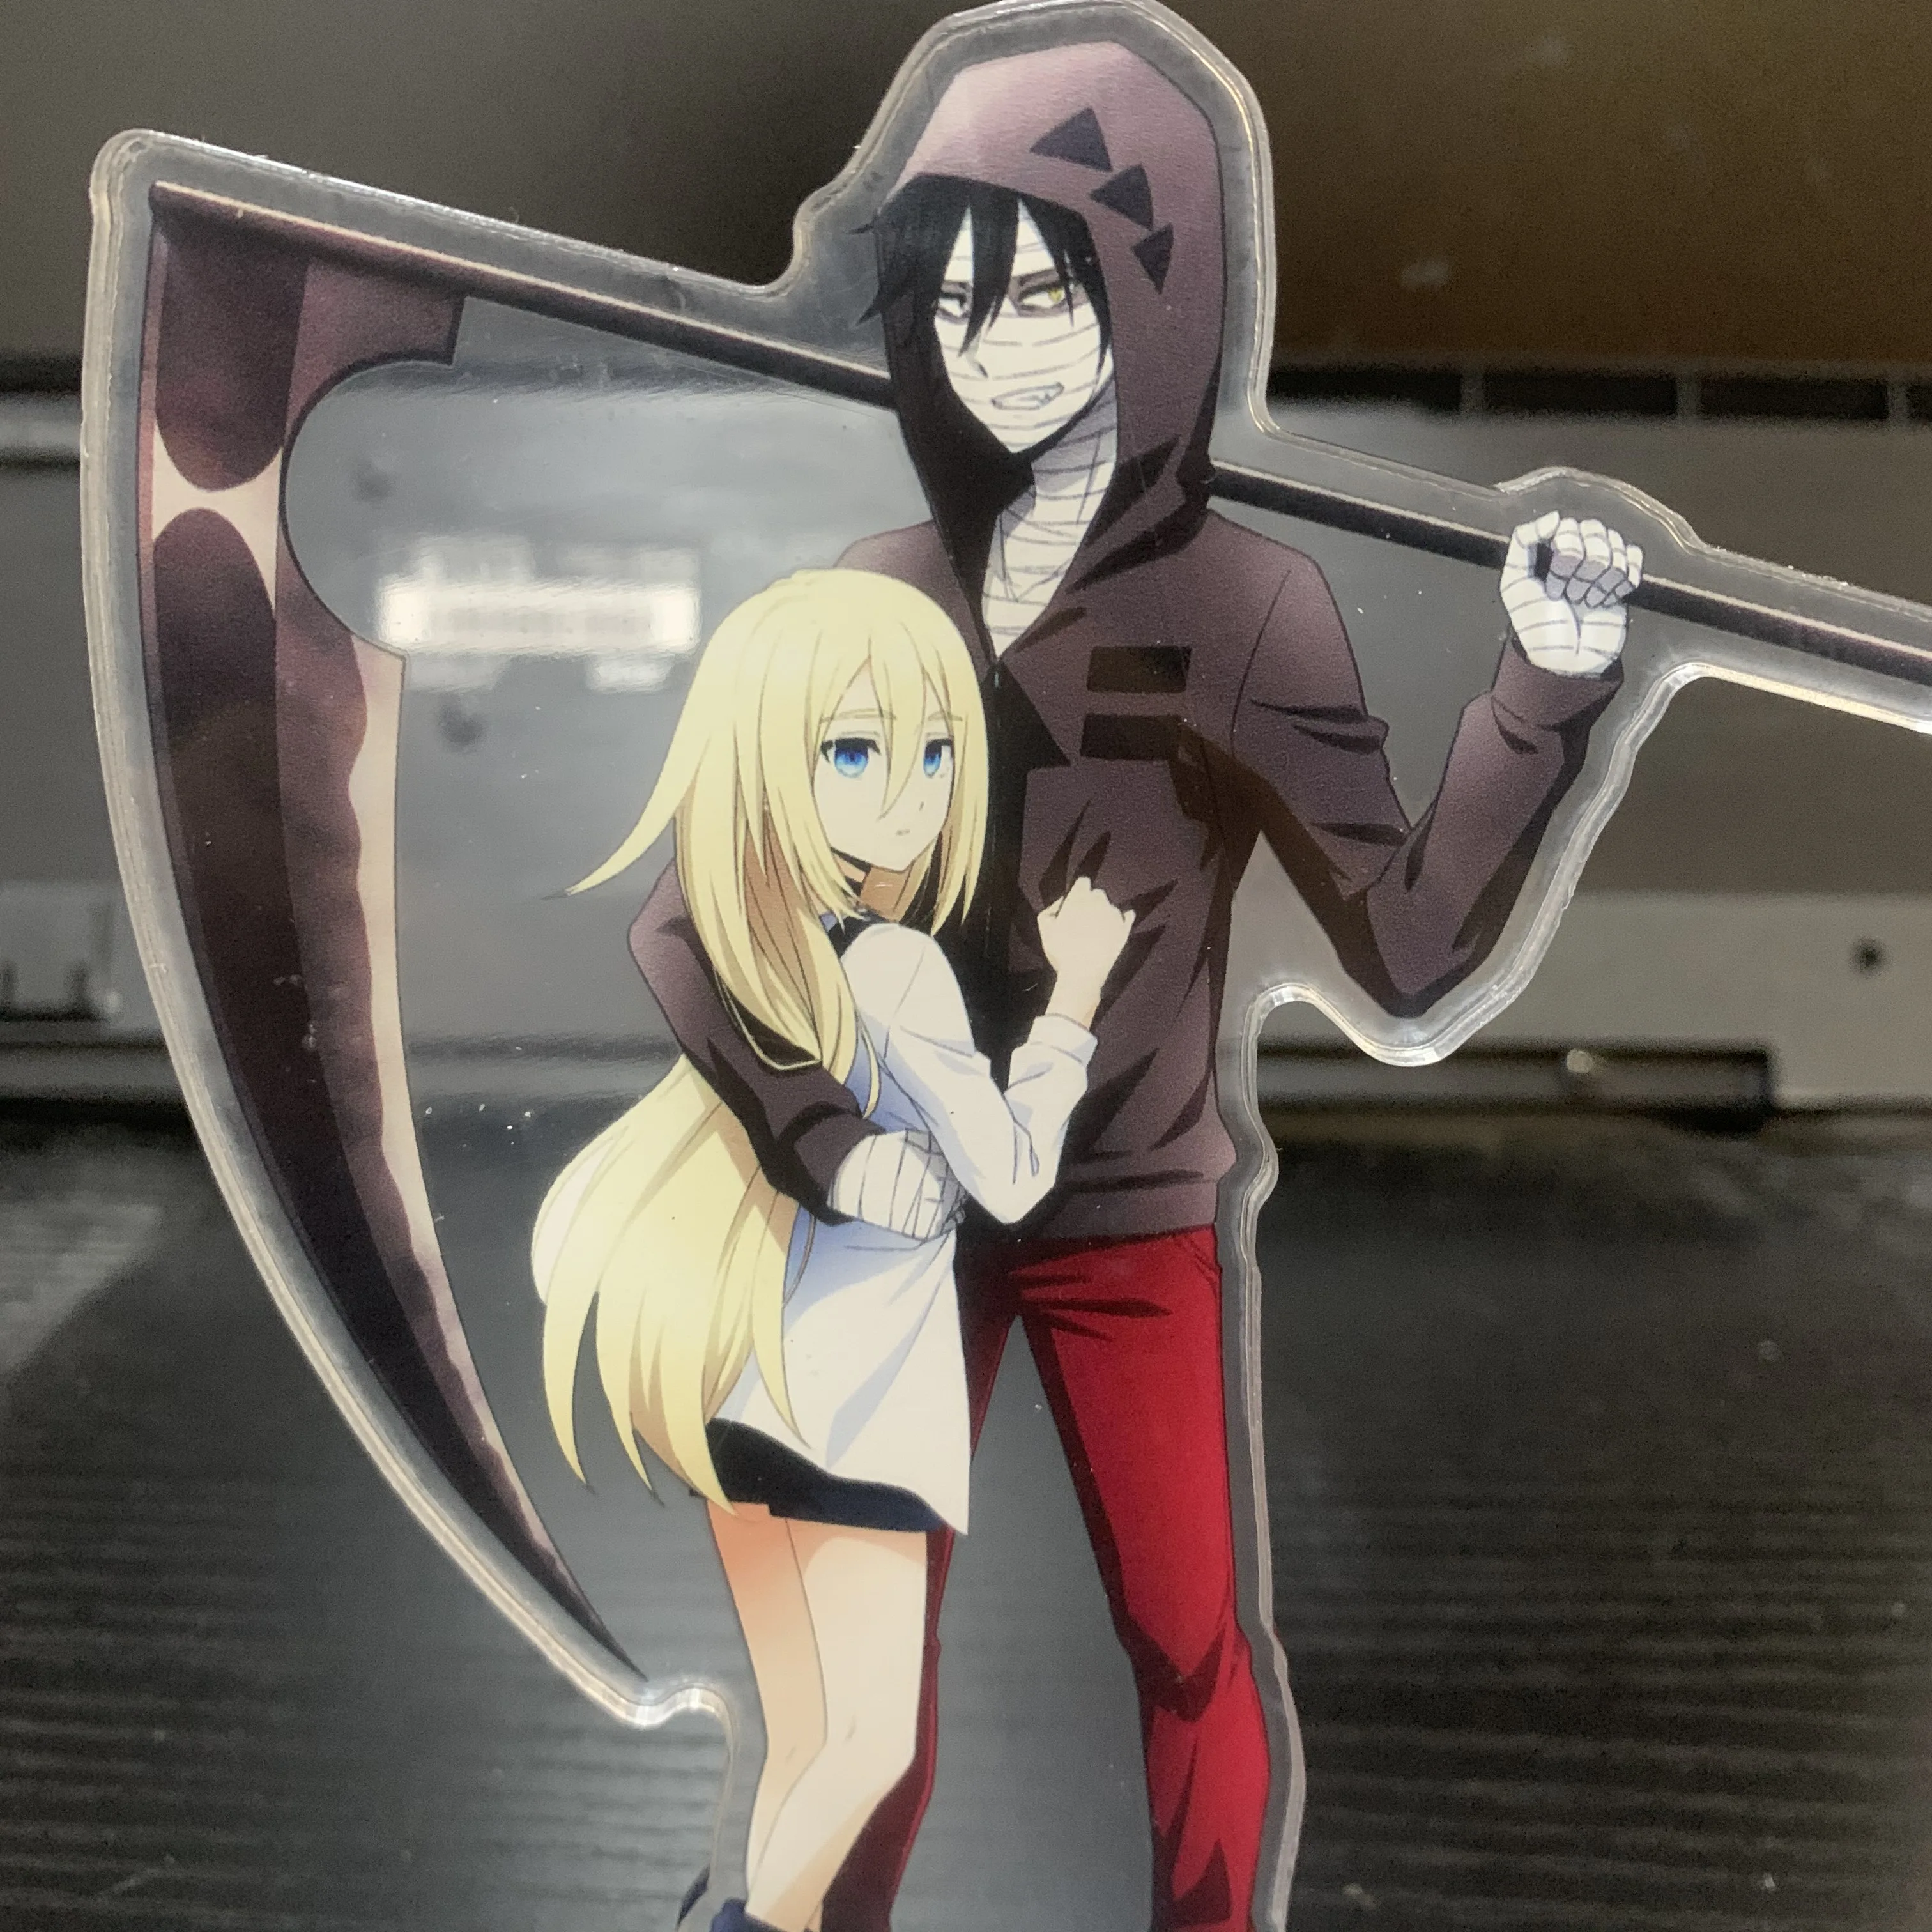 Angels of Death: The Complete Series [Blu-ray] - Best Buy